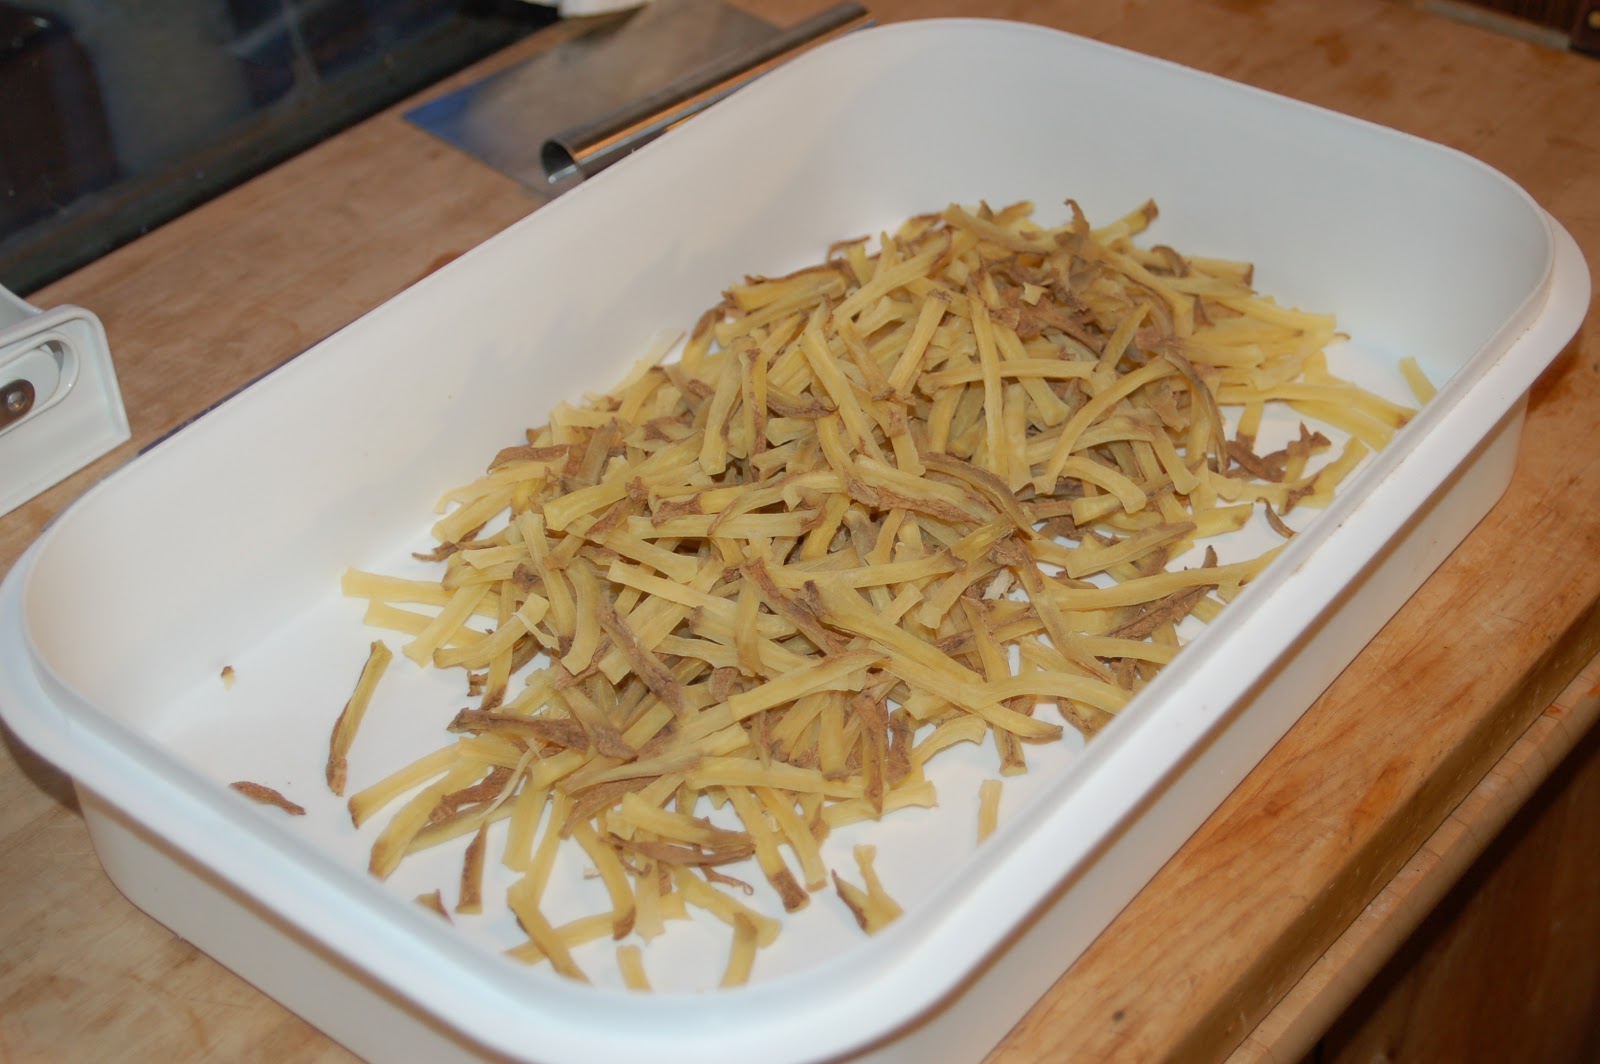 Dehydrating Way Beyond Jerky: And Then There's Shoestring Taters